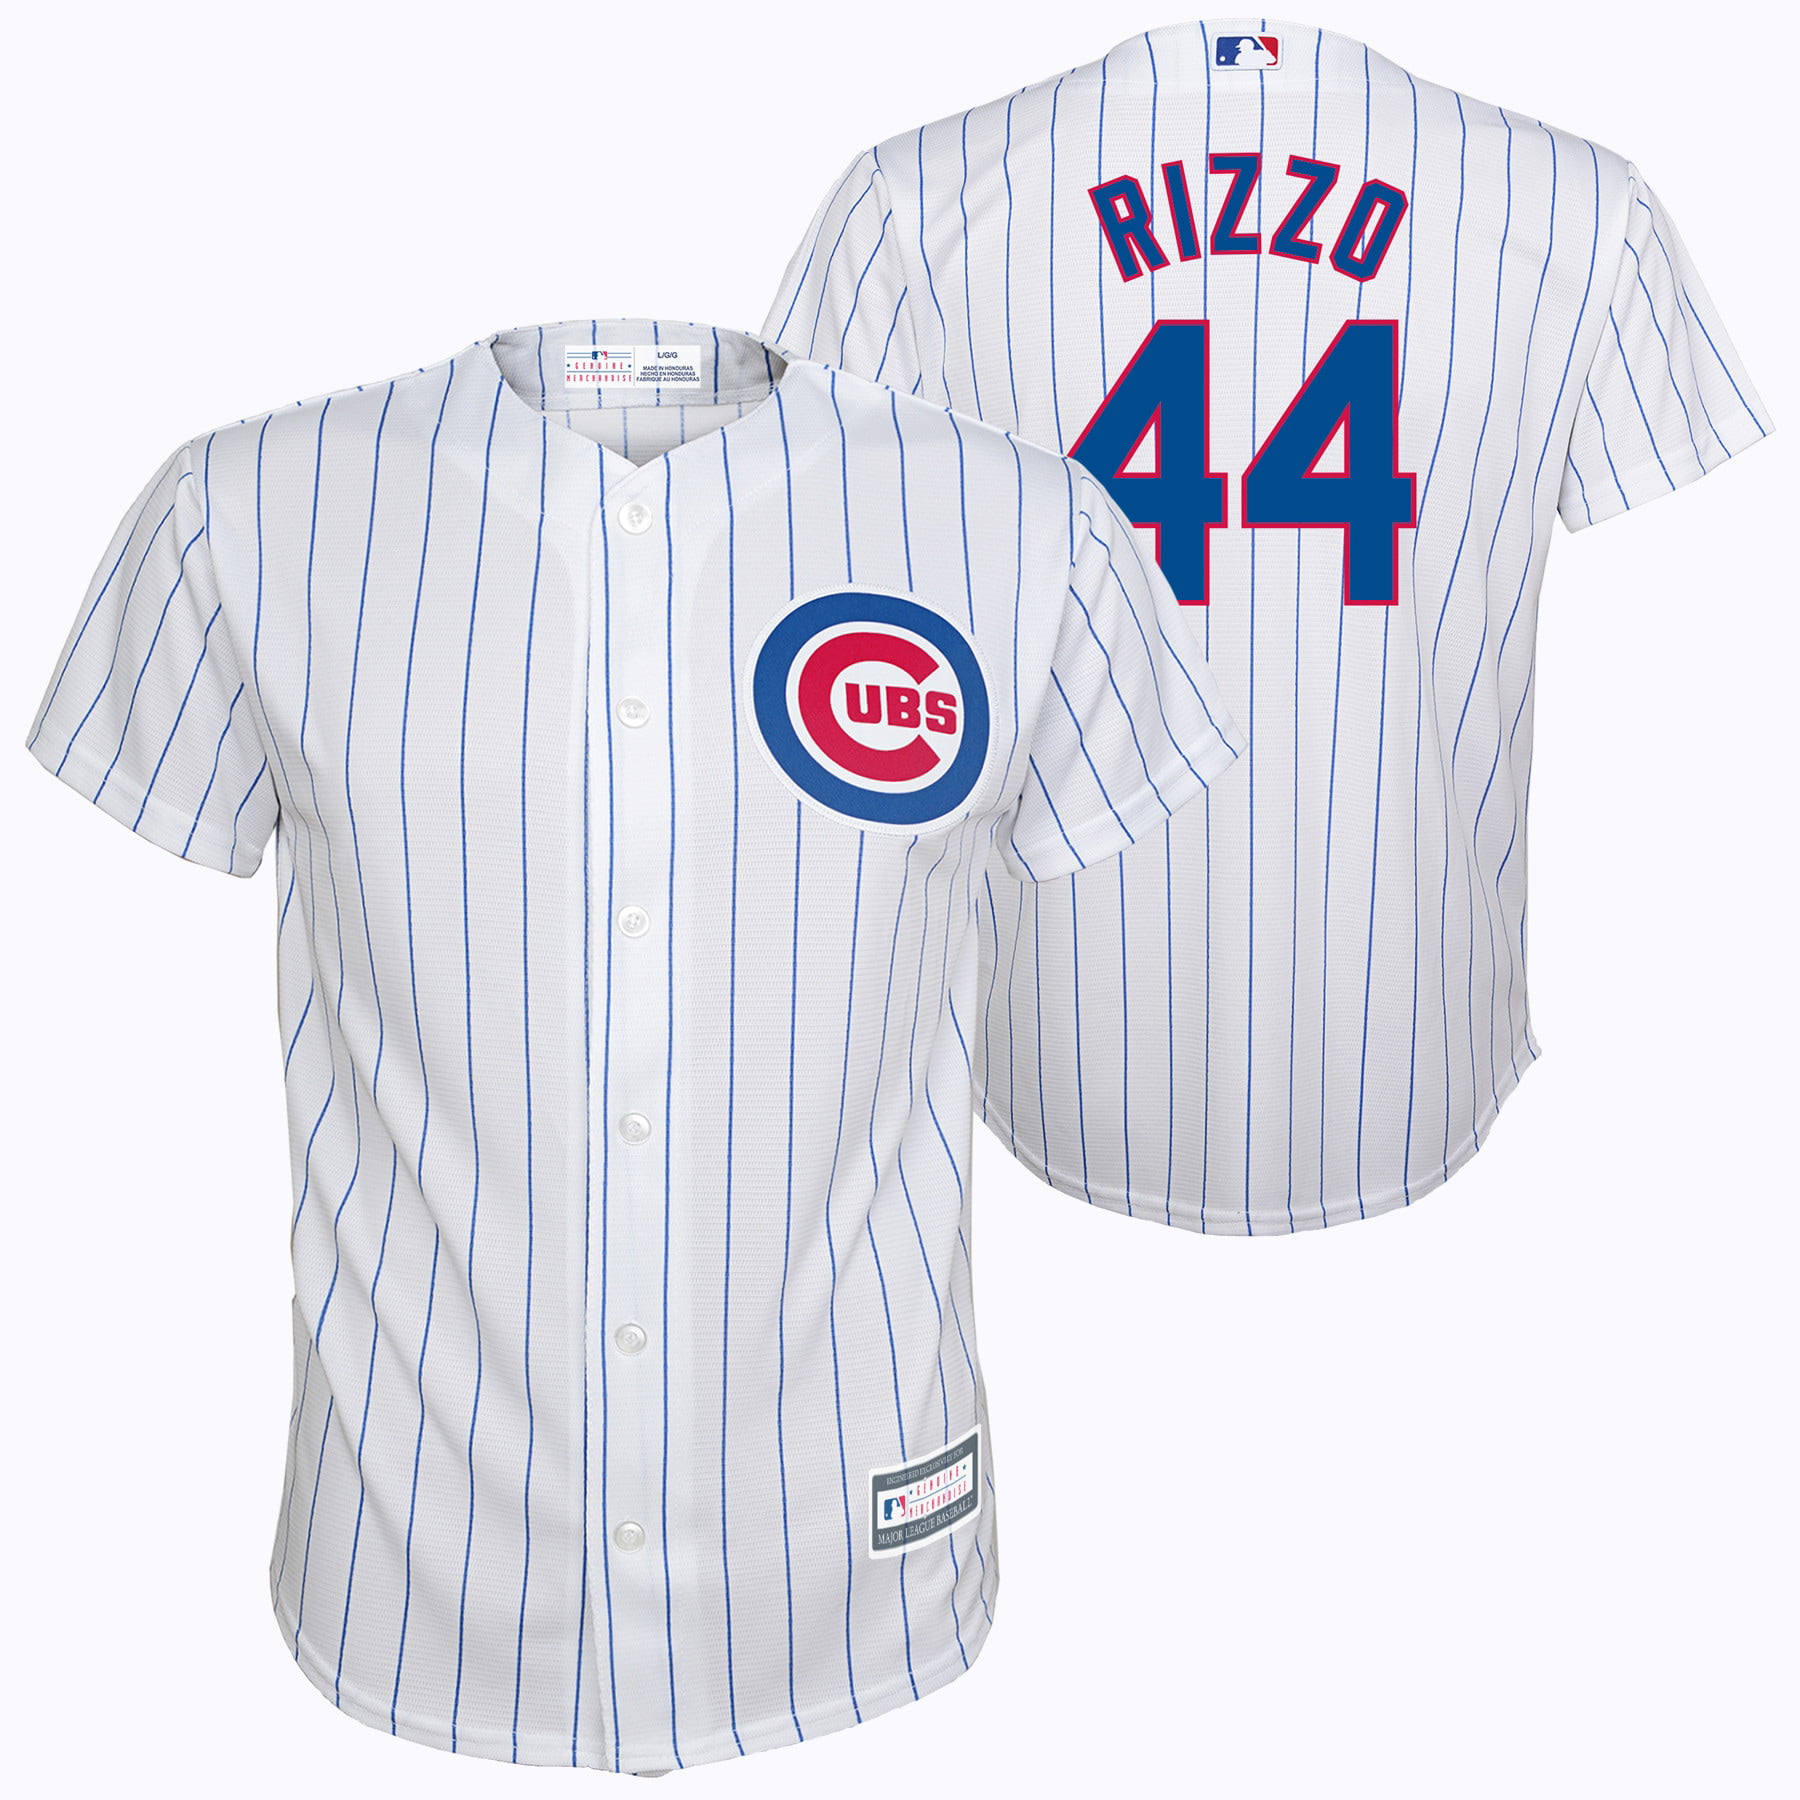 youth rizzo jersey